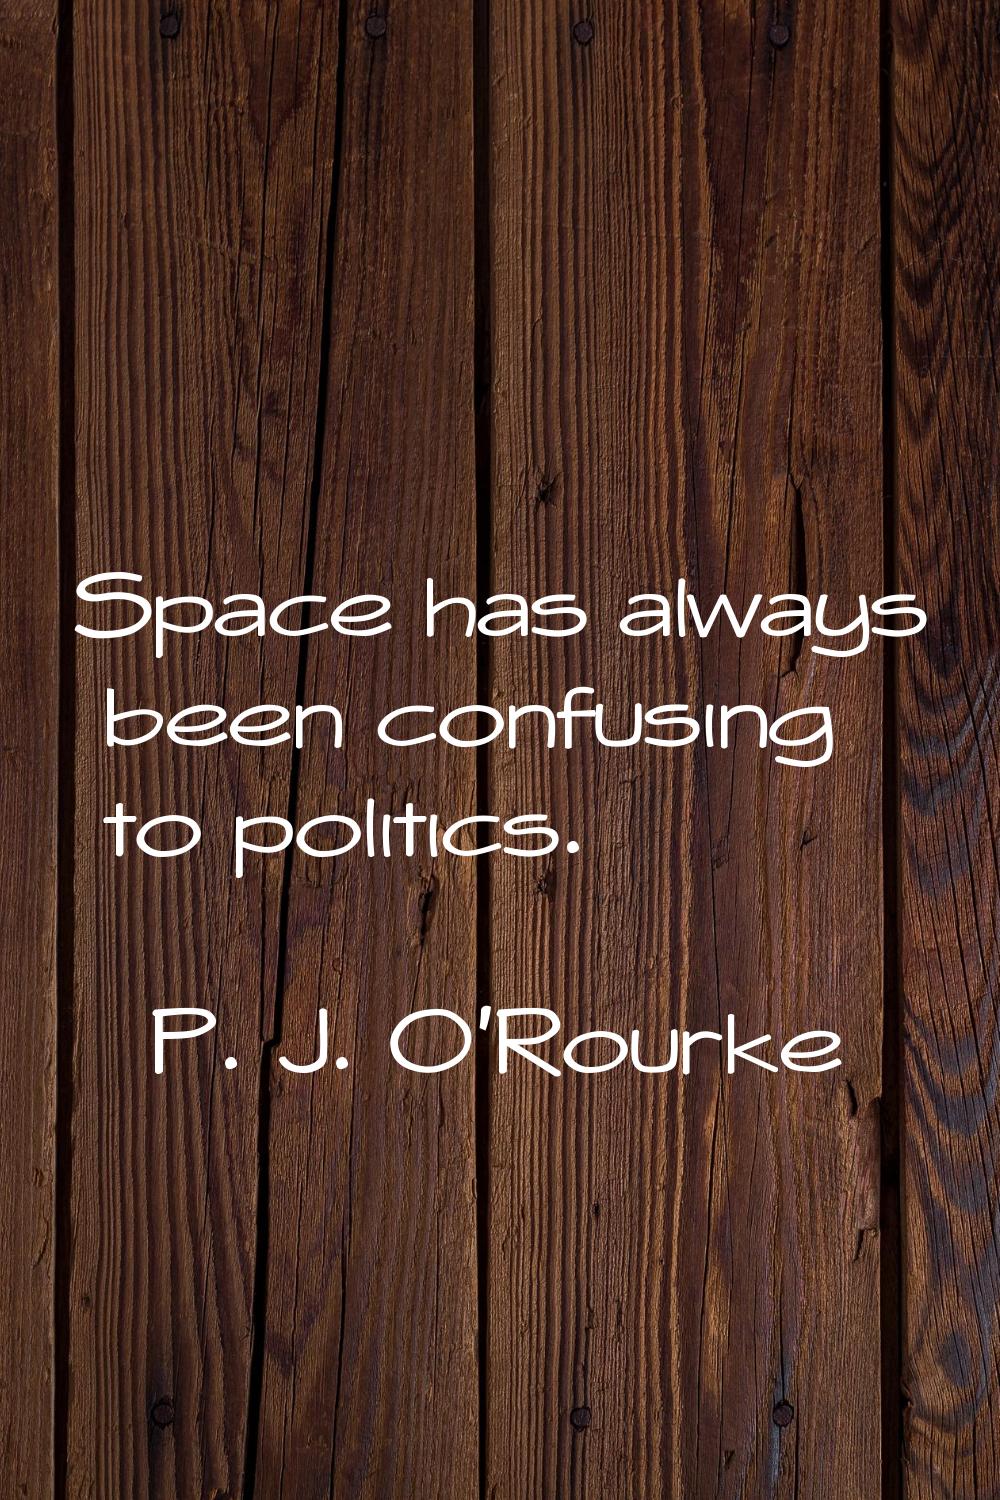 Space has always been confusing to politics.